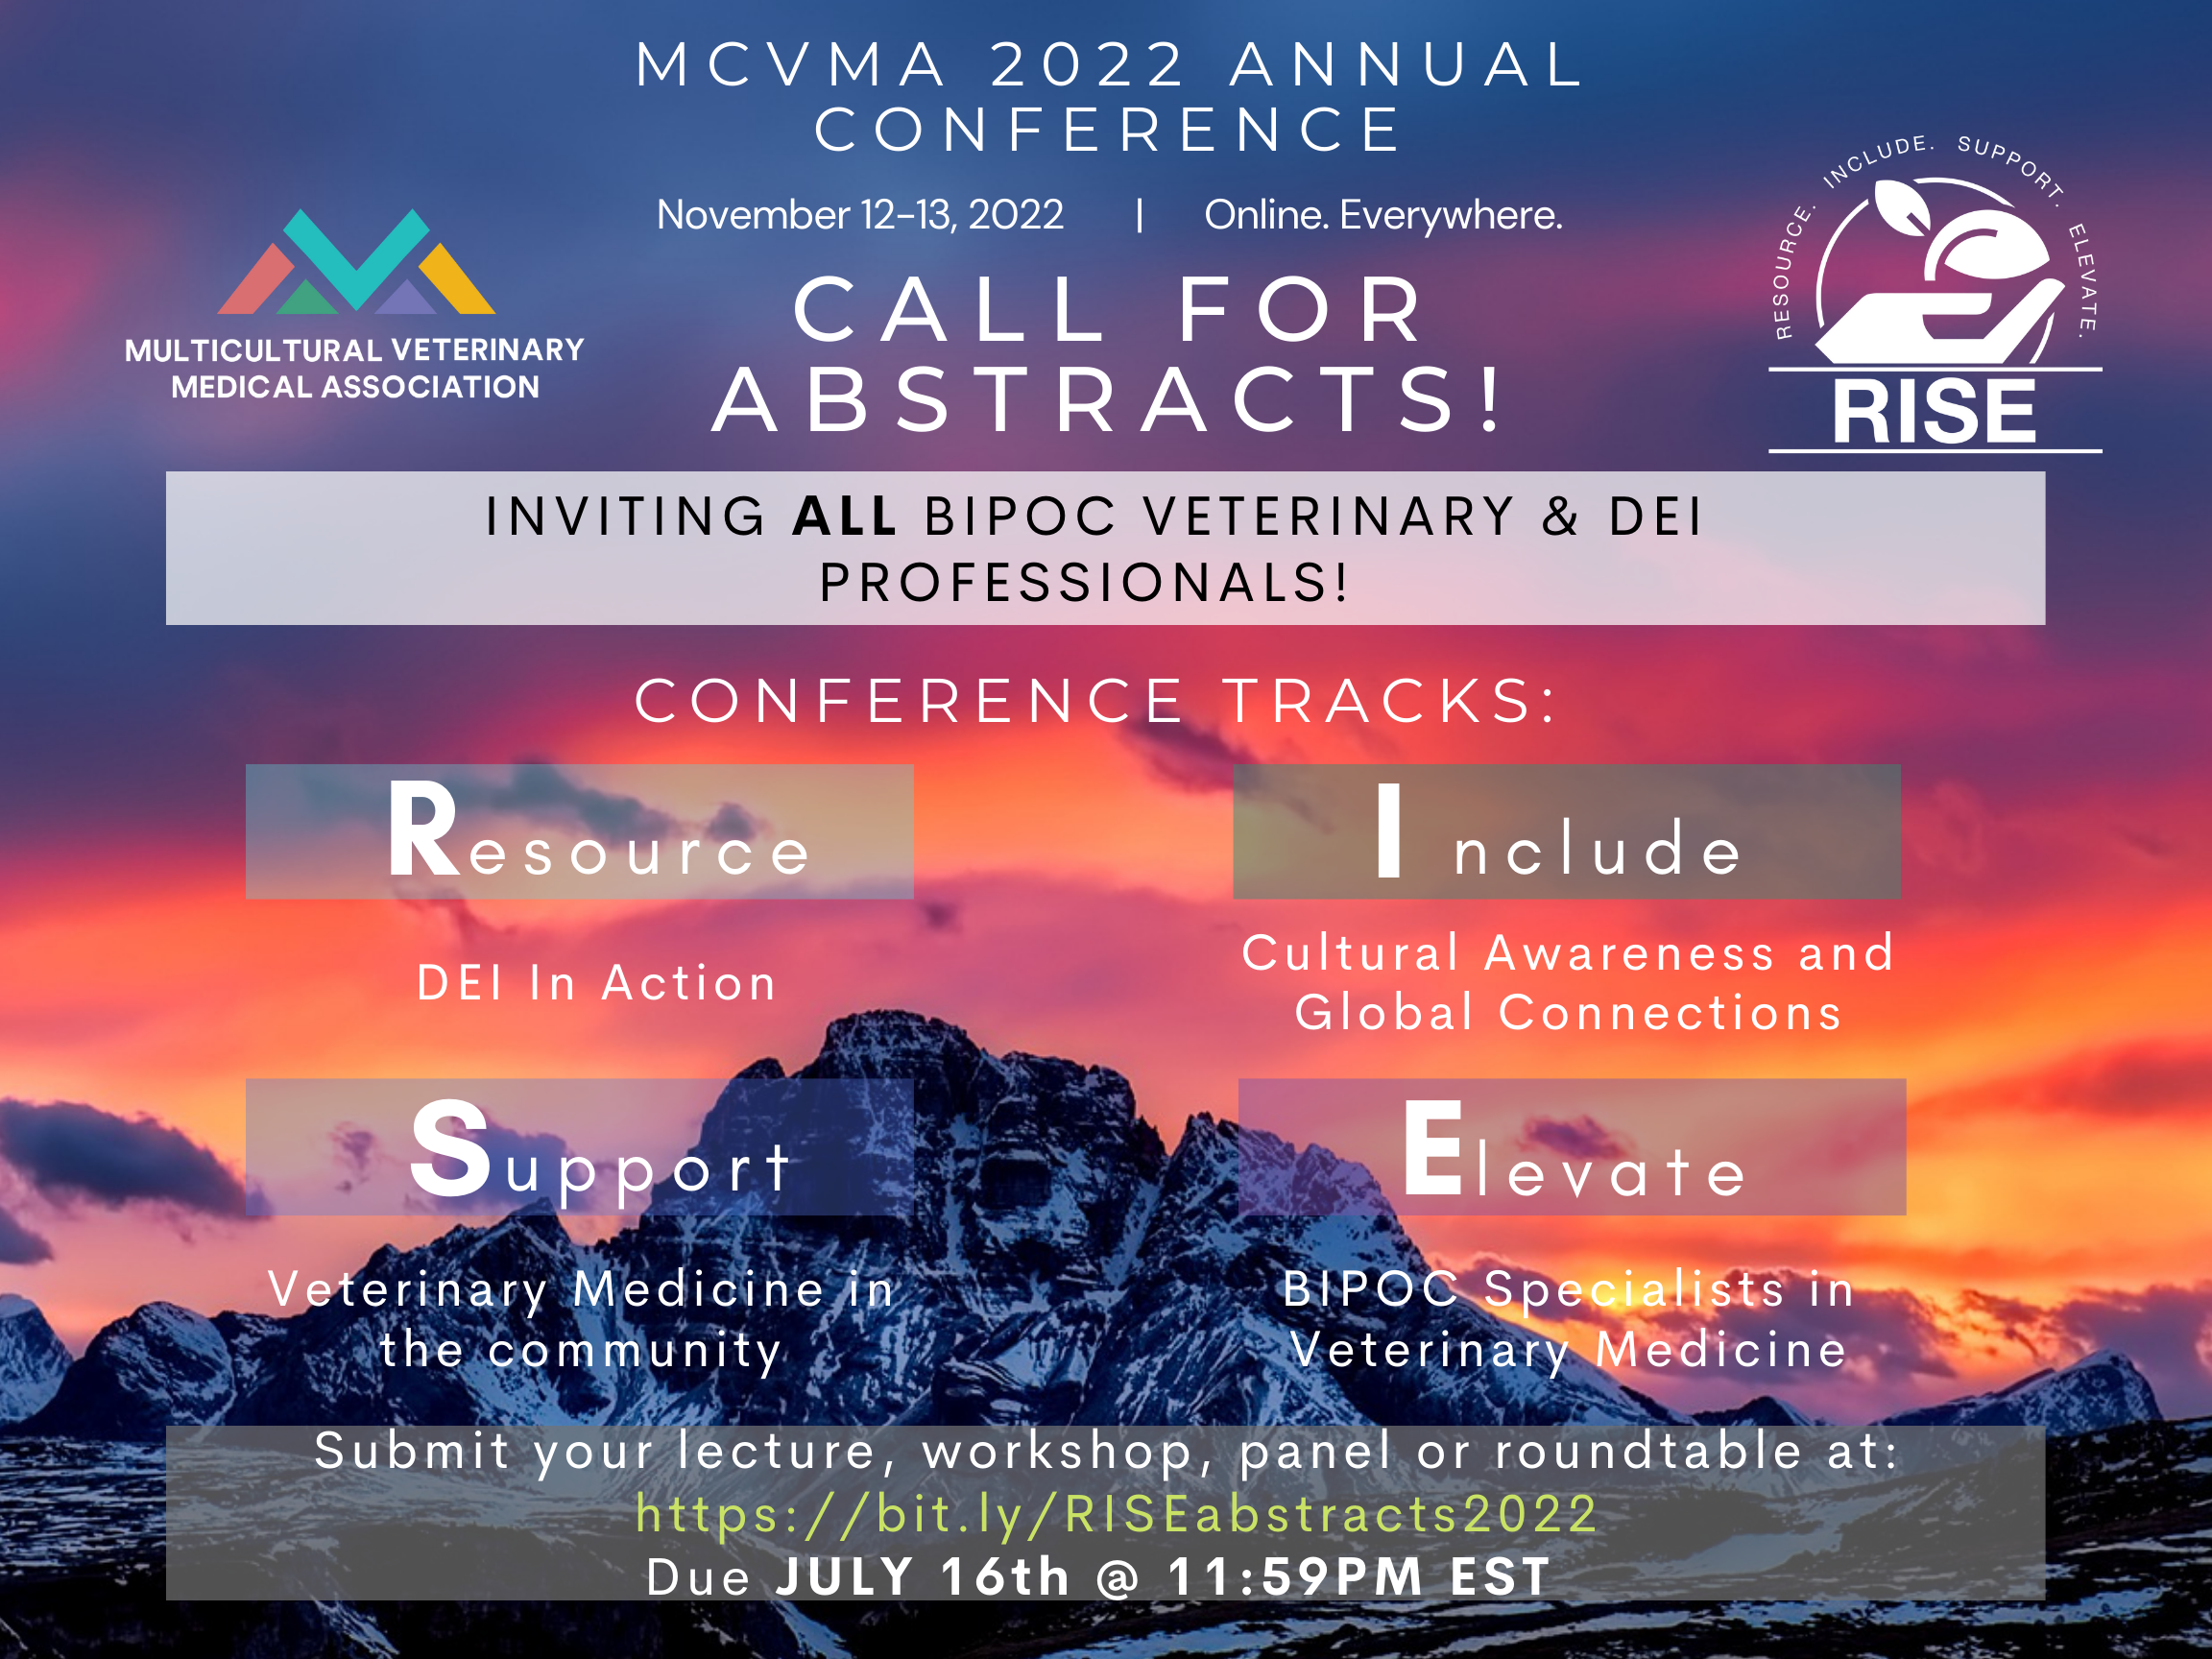 RISE 2022 Call for Abstracts